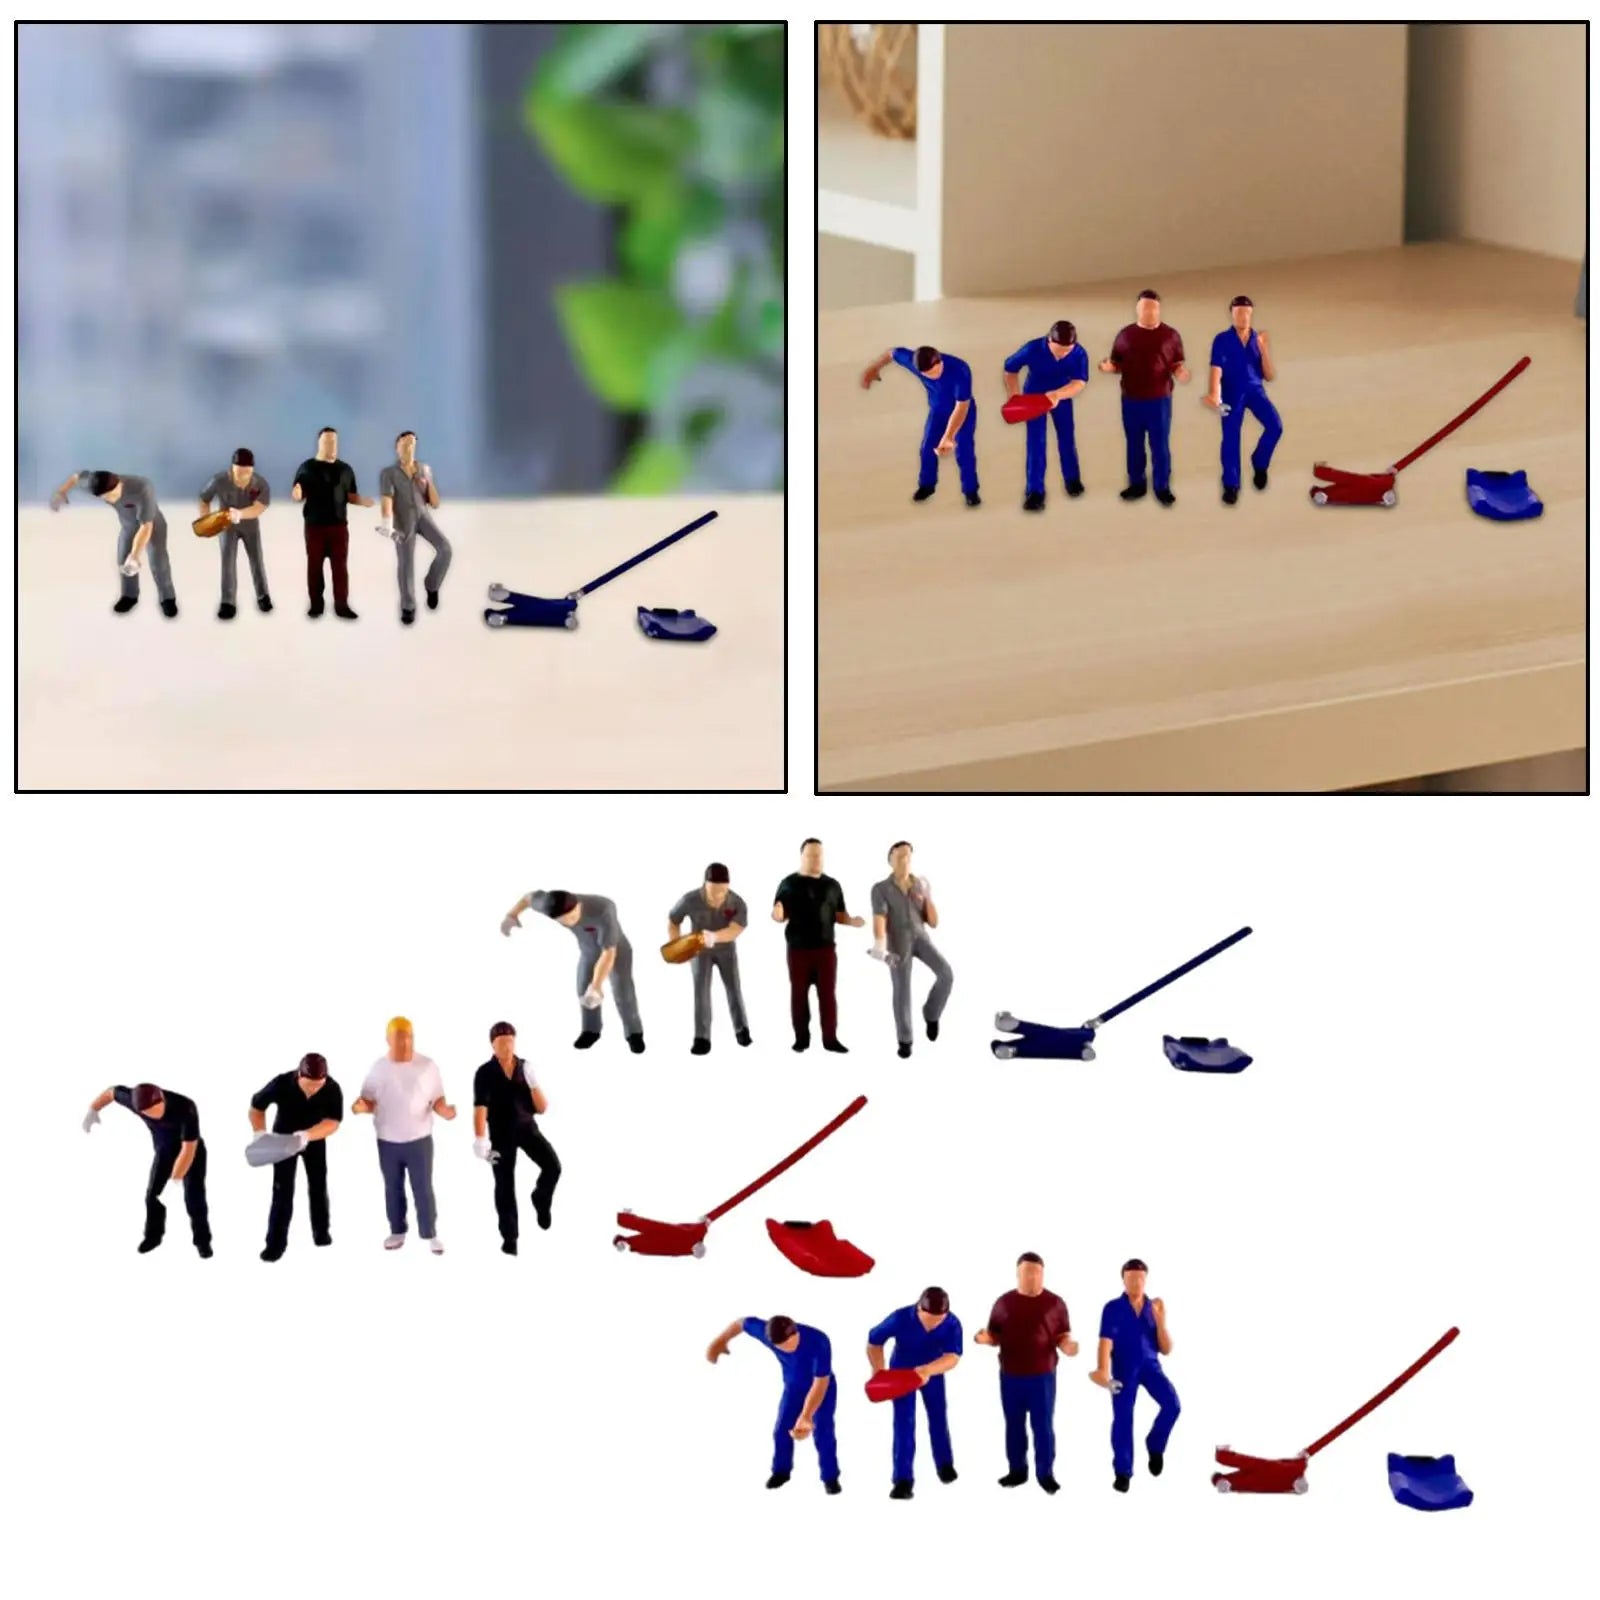 4x 1/64 Diorama Figures Miniature Scene for Model Building Kits DIY Projects Dollhouse Accessories Railway Sets Collections